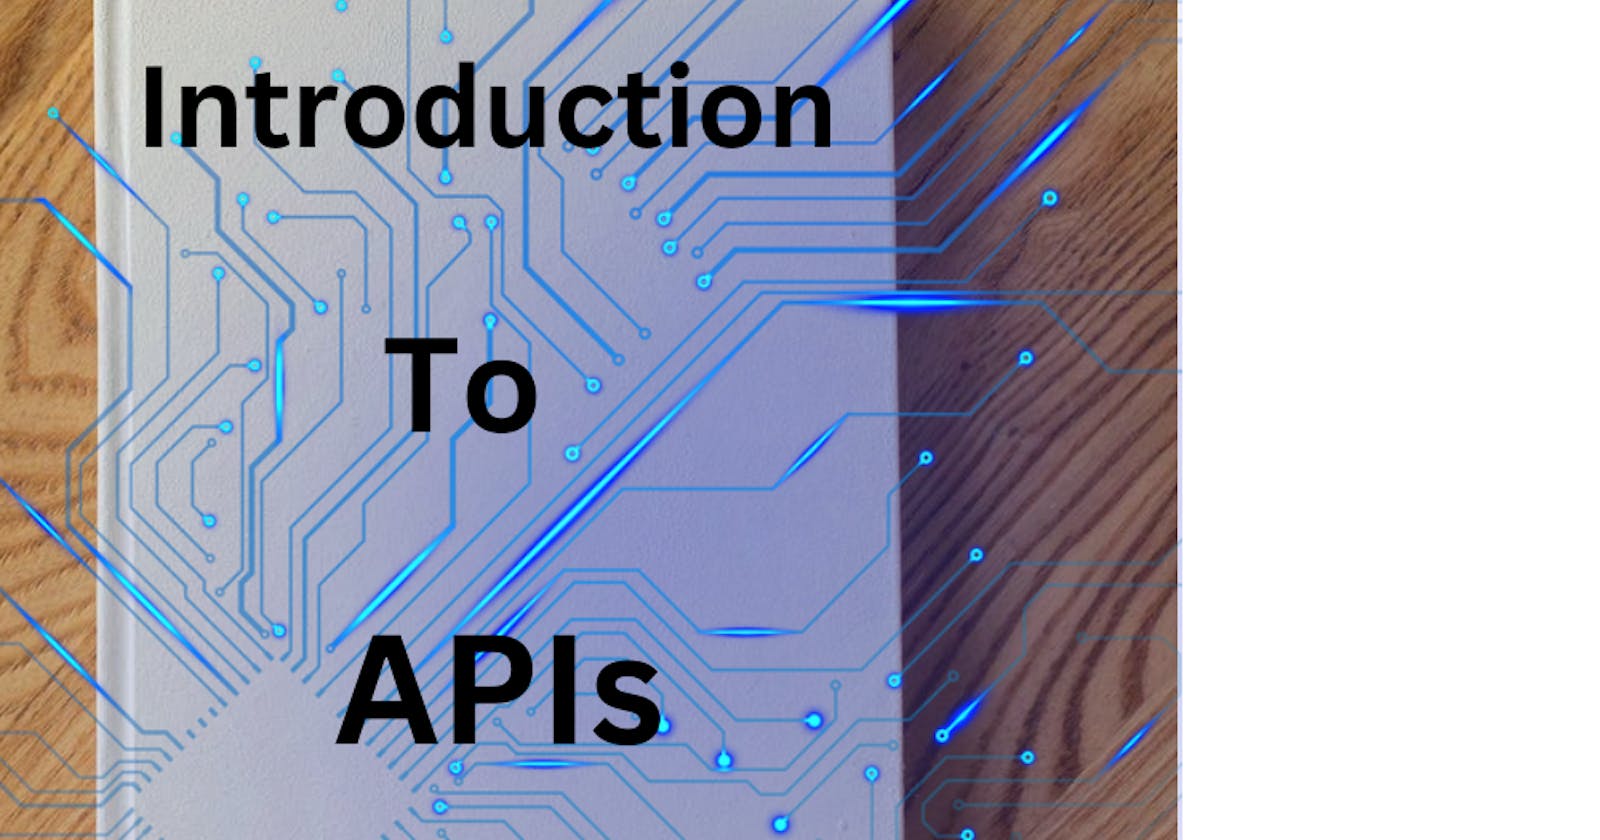 Introduction to APIs (Application programming interface)